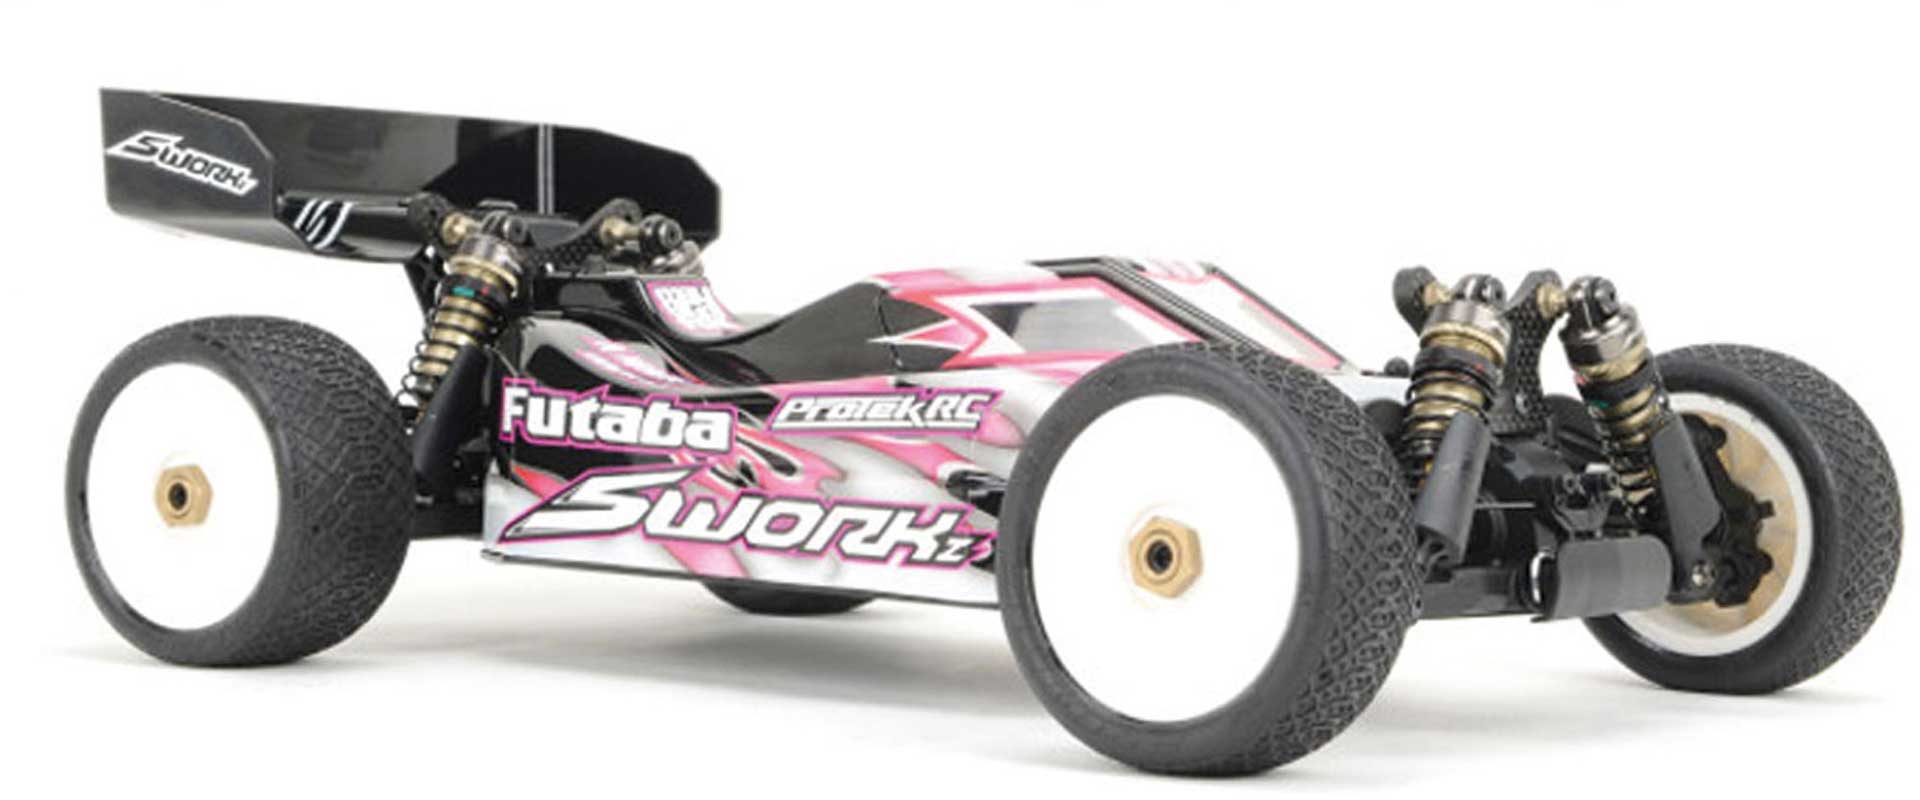 SWORKZ S14-2 1/10 OFF-ROAD RACING BUGGY PRO KIT ELECTRIQUE  4WD